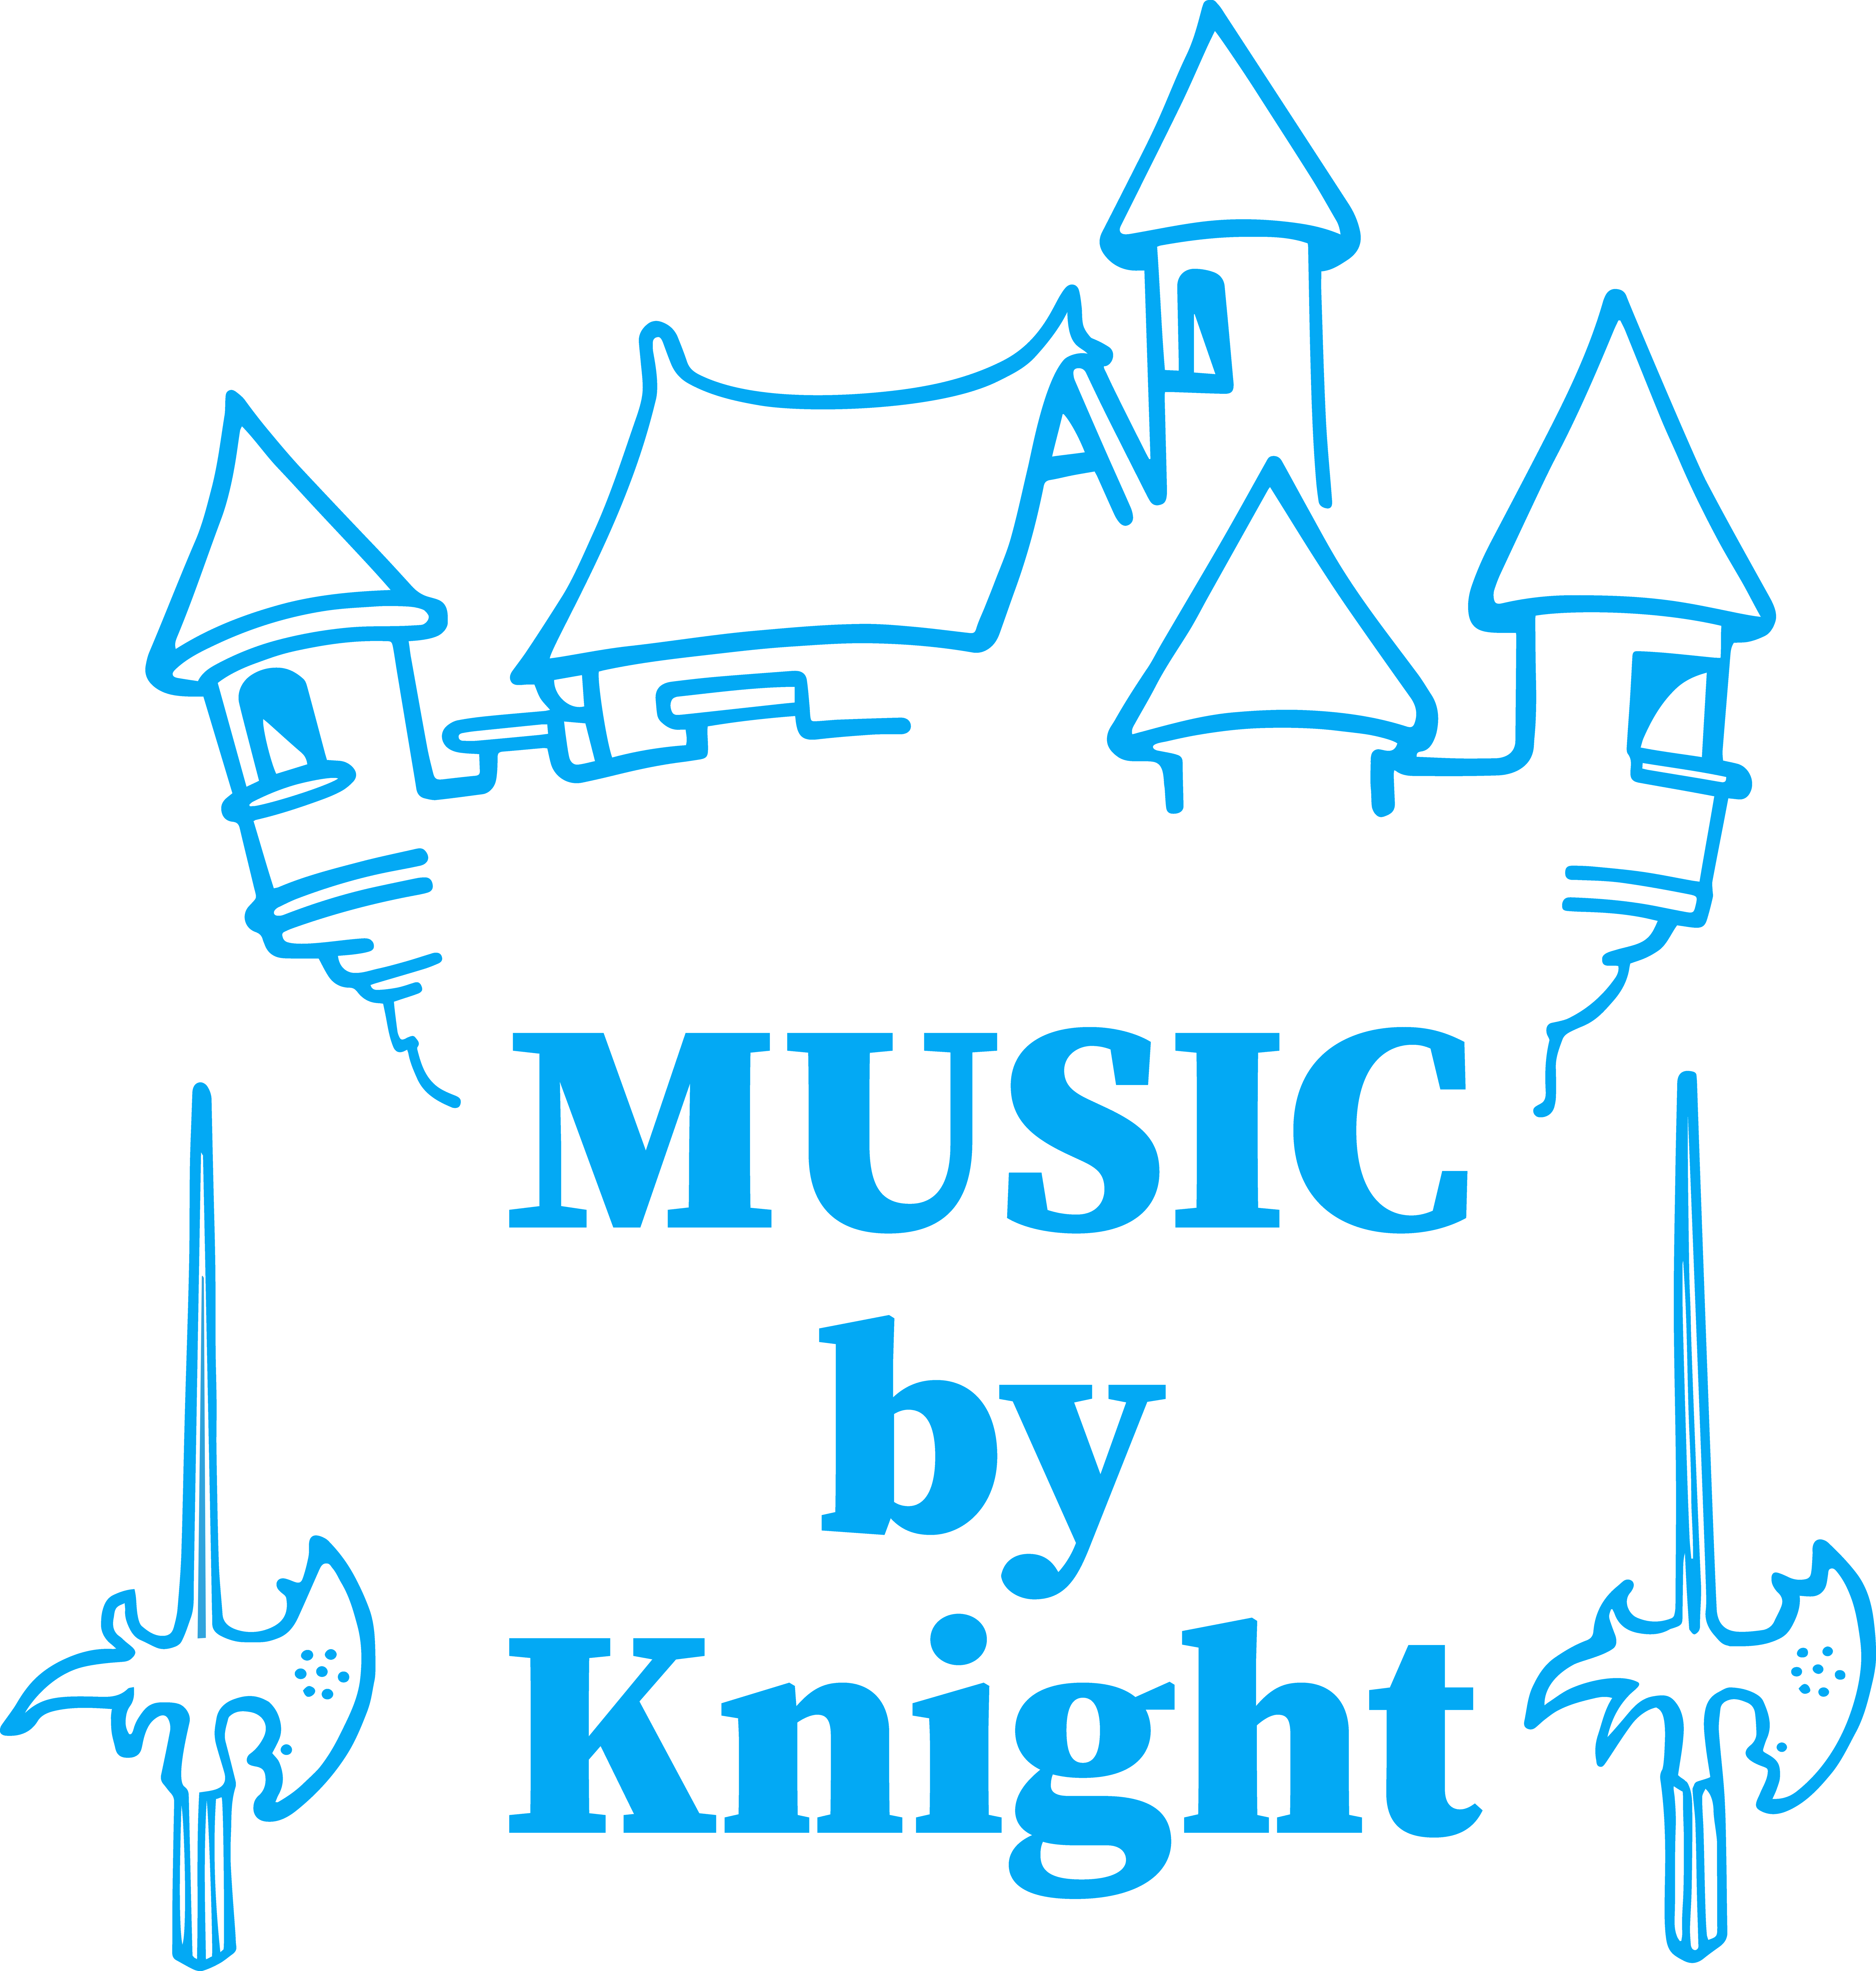 MUSIC by Knight